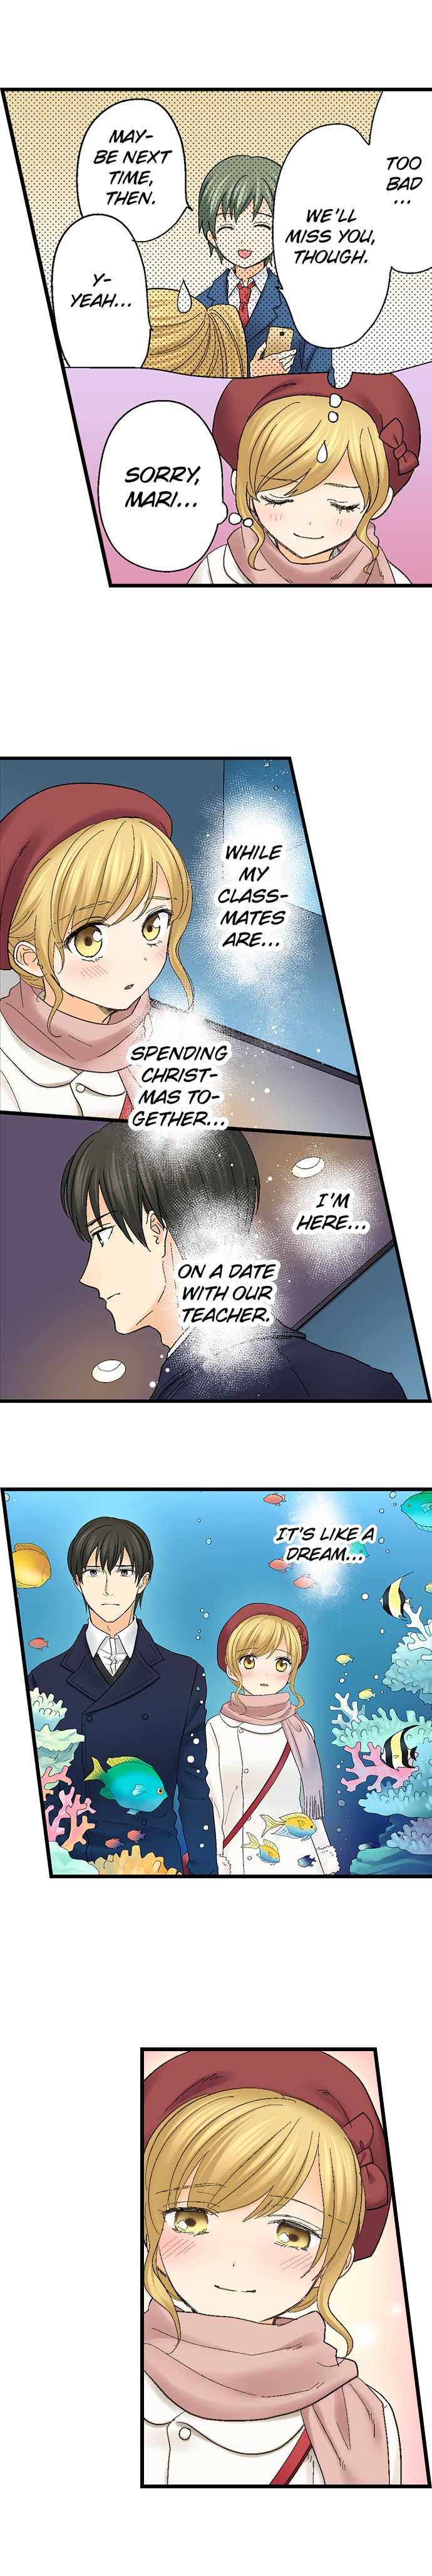 Running a Love Hotel with My Math Teacher - Chapter 101 Page 3